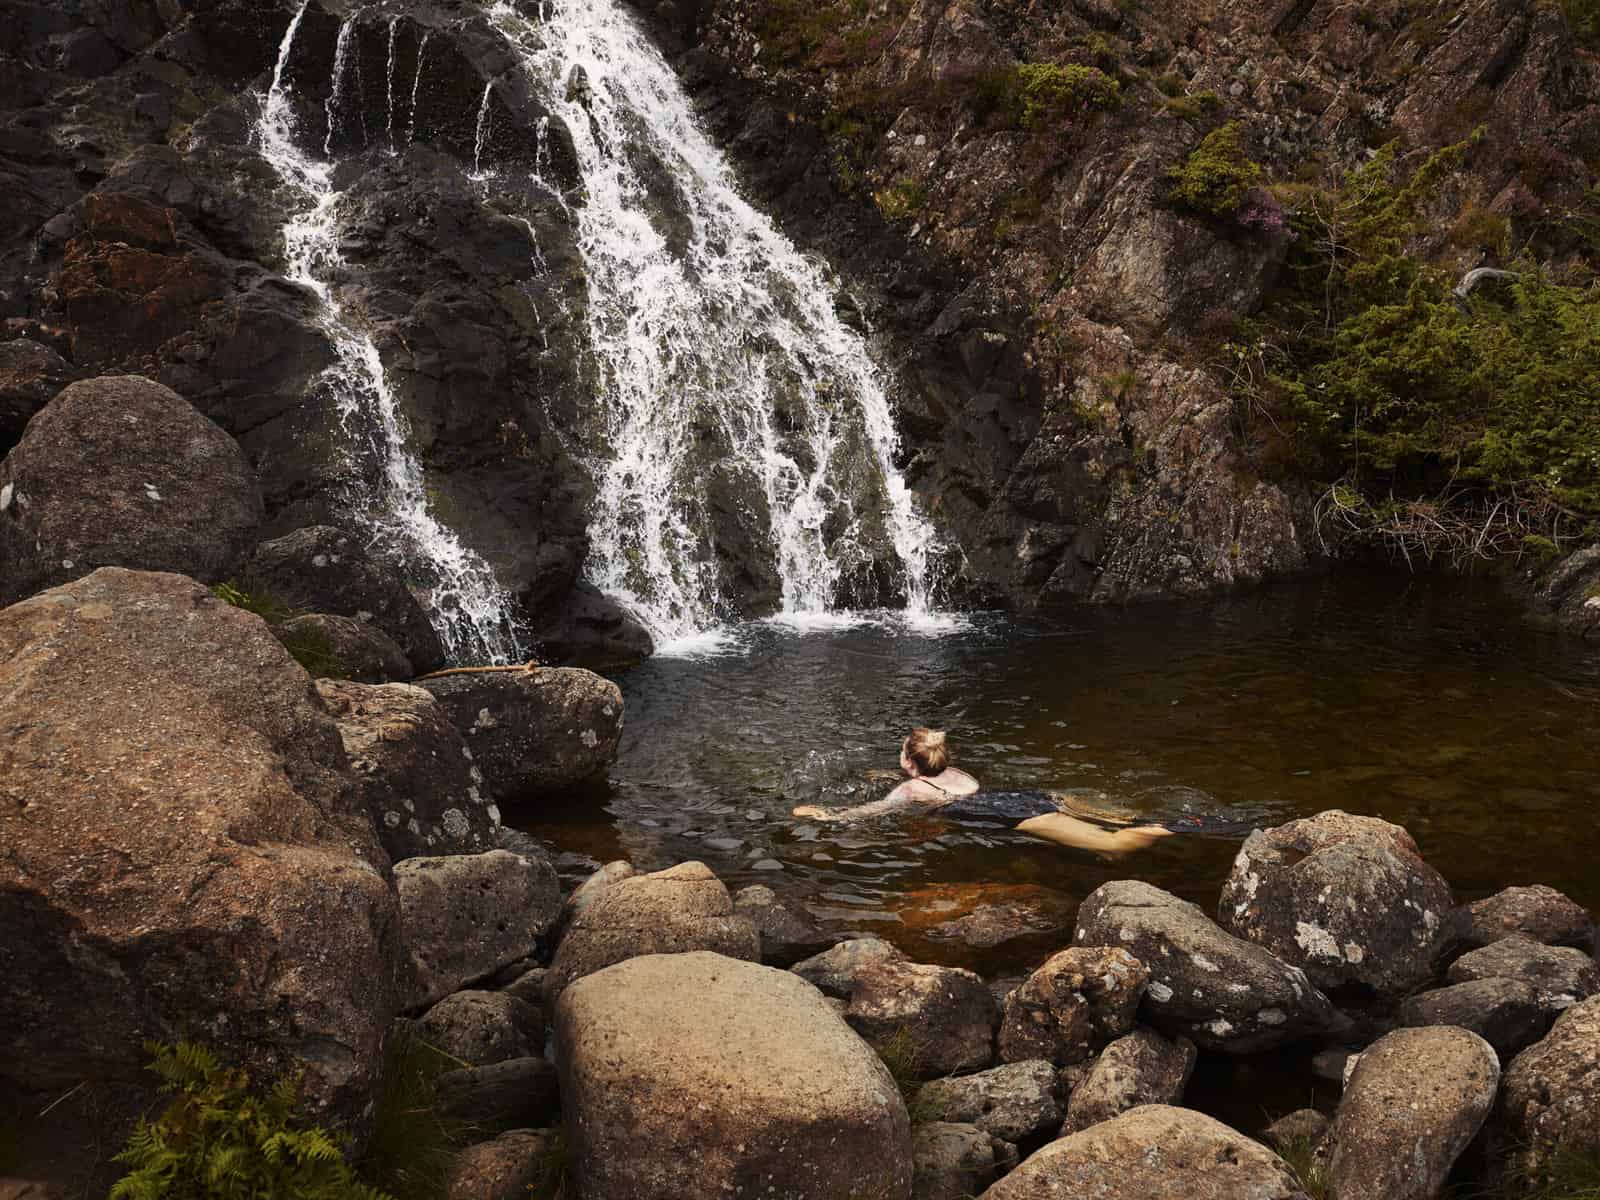 ID: A landscape image. Fay is pictured swimming in a wild swimming spot at the base of a waterfall. The water from above is white and fast flowing. Around the pool are lots of big rocks. The image is quite brown and Fay is looking at the waterfall wearing a black swimsuit.